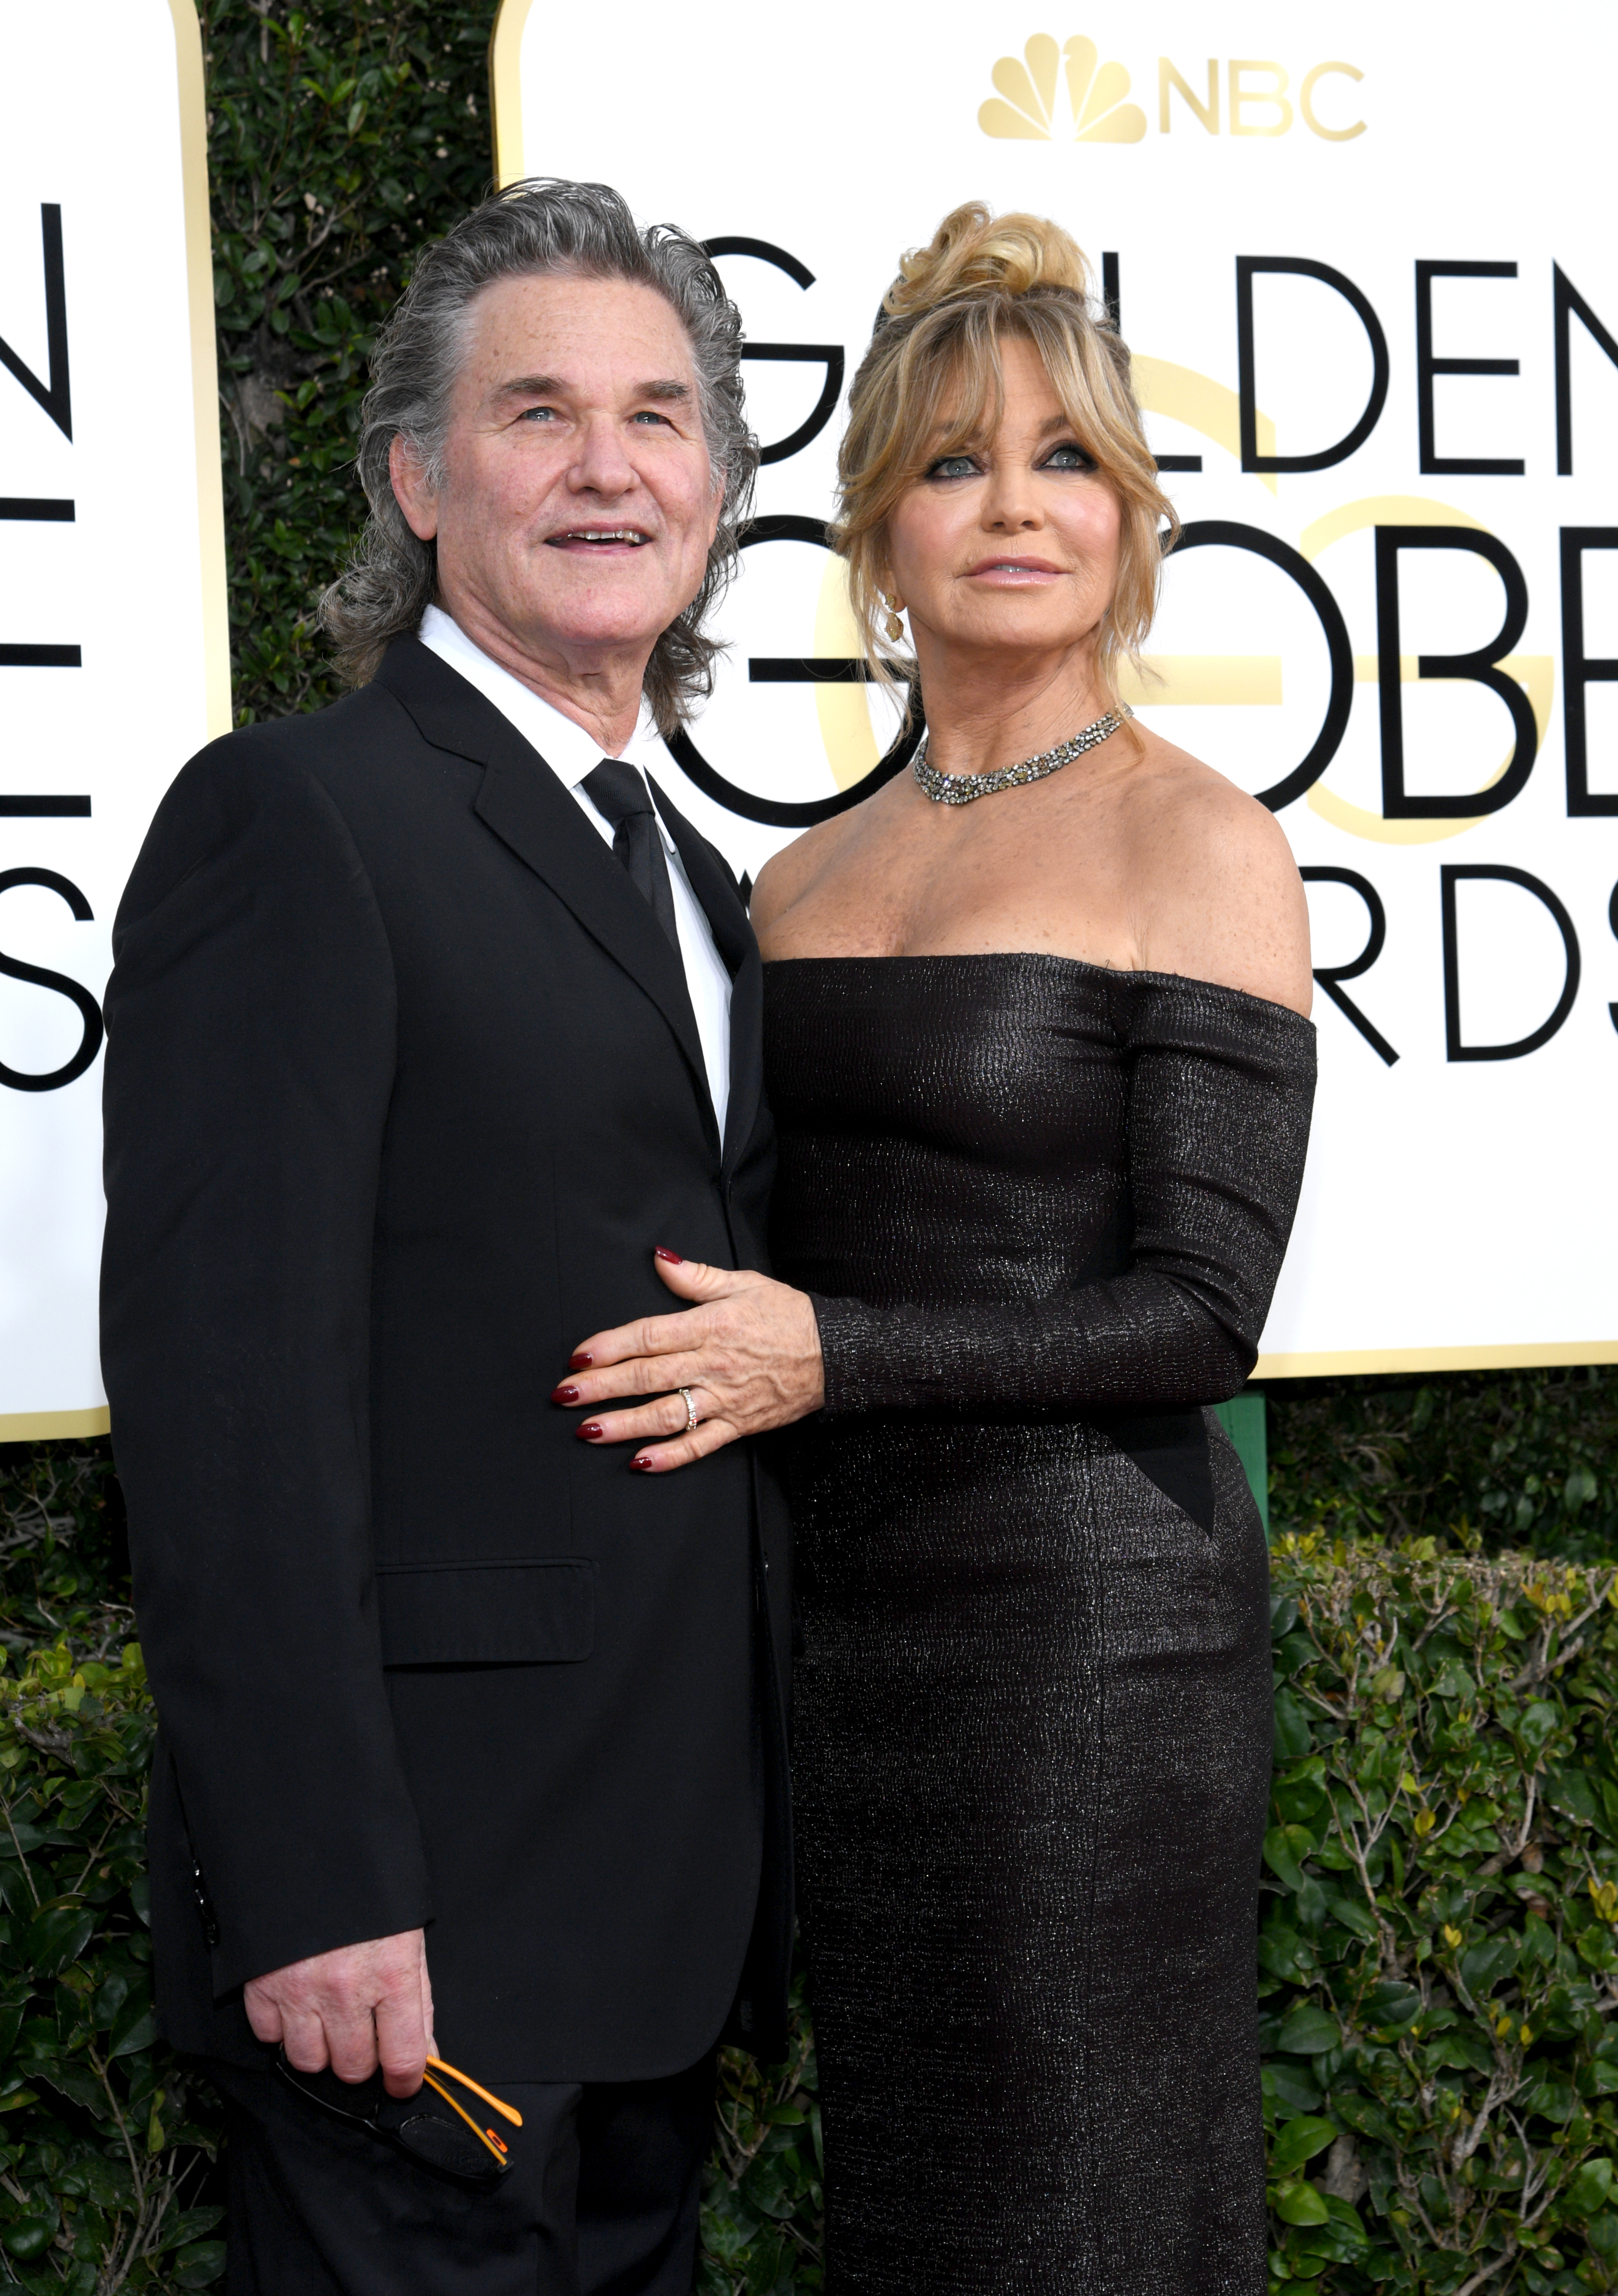 Kurt Russell and Goldie Hawn at the Beverly Hilton Hotel on January 8, 2017. | Source: Getty Images